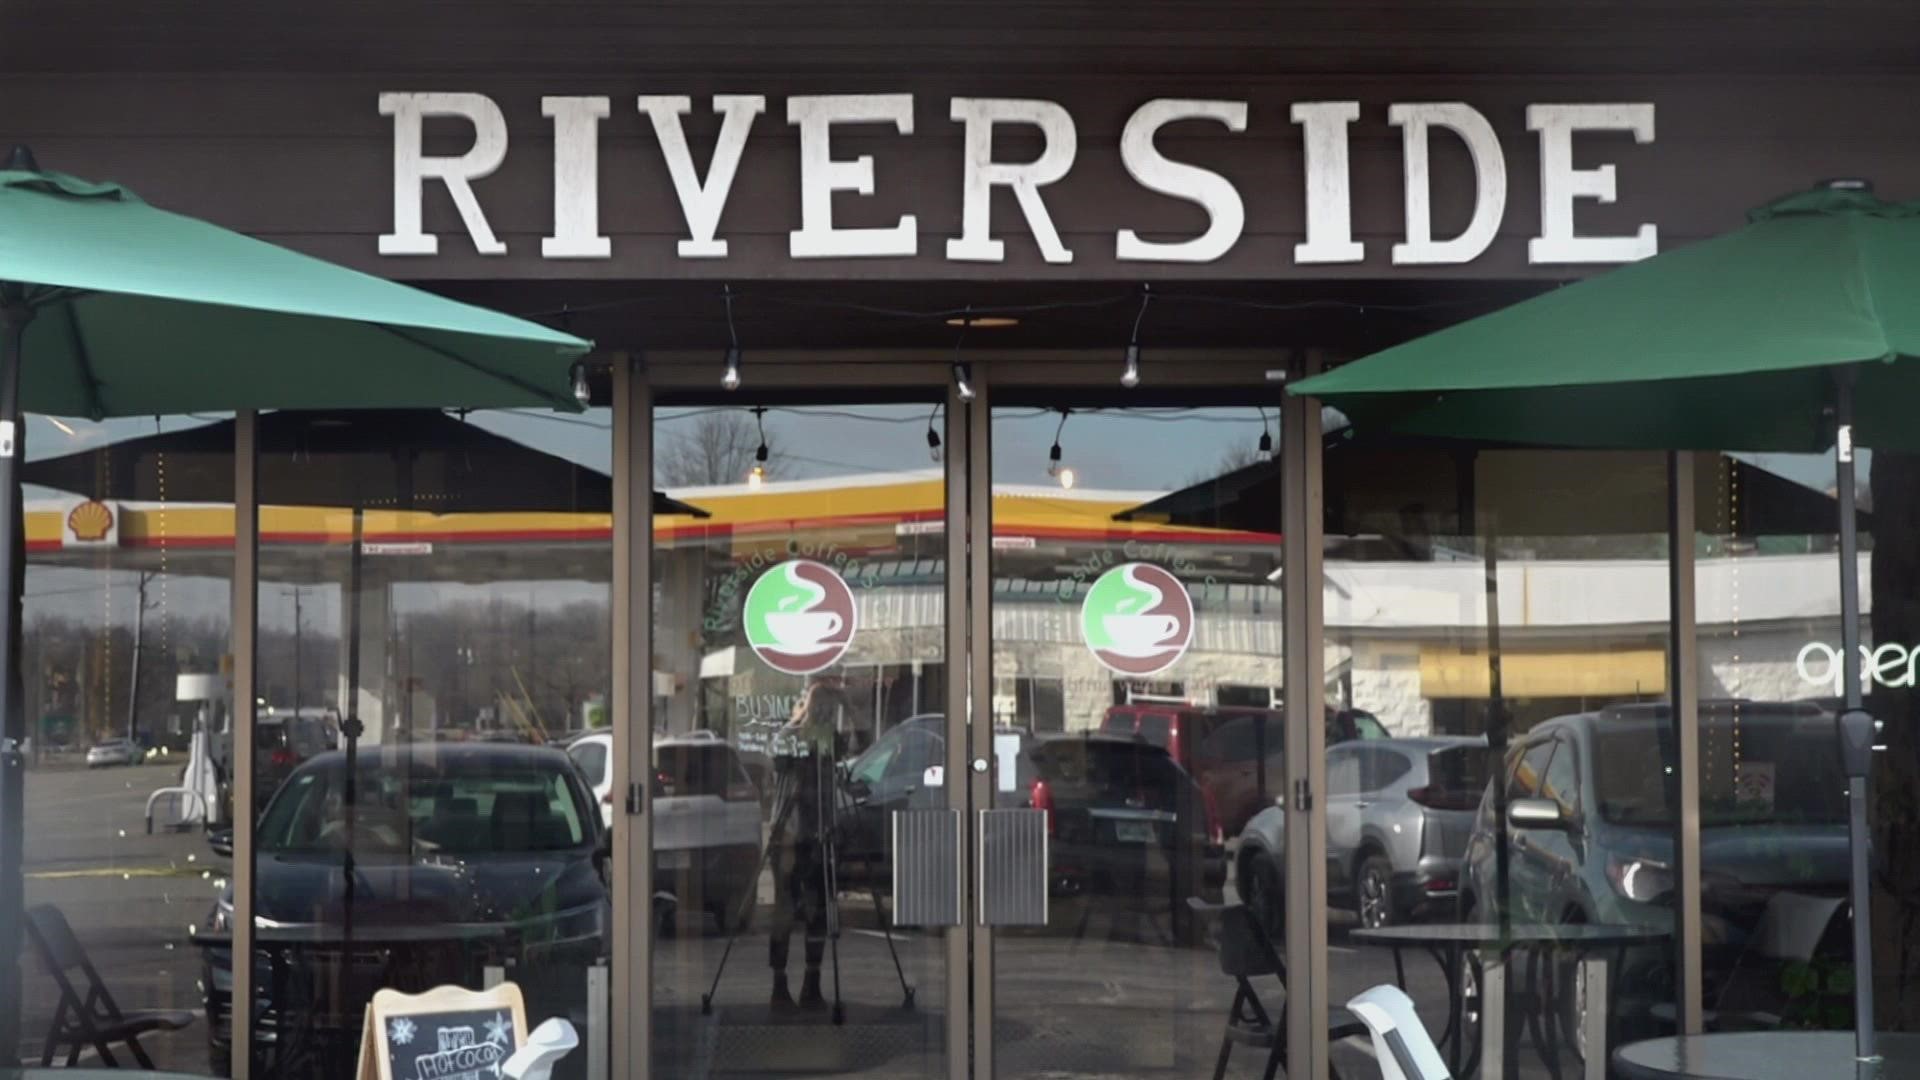 Riverside Coffee Shop utilizes Applied Behavior Analysis (ABA), a scientific-based approach, to teach skills such as money management and nutrition-based cooking.